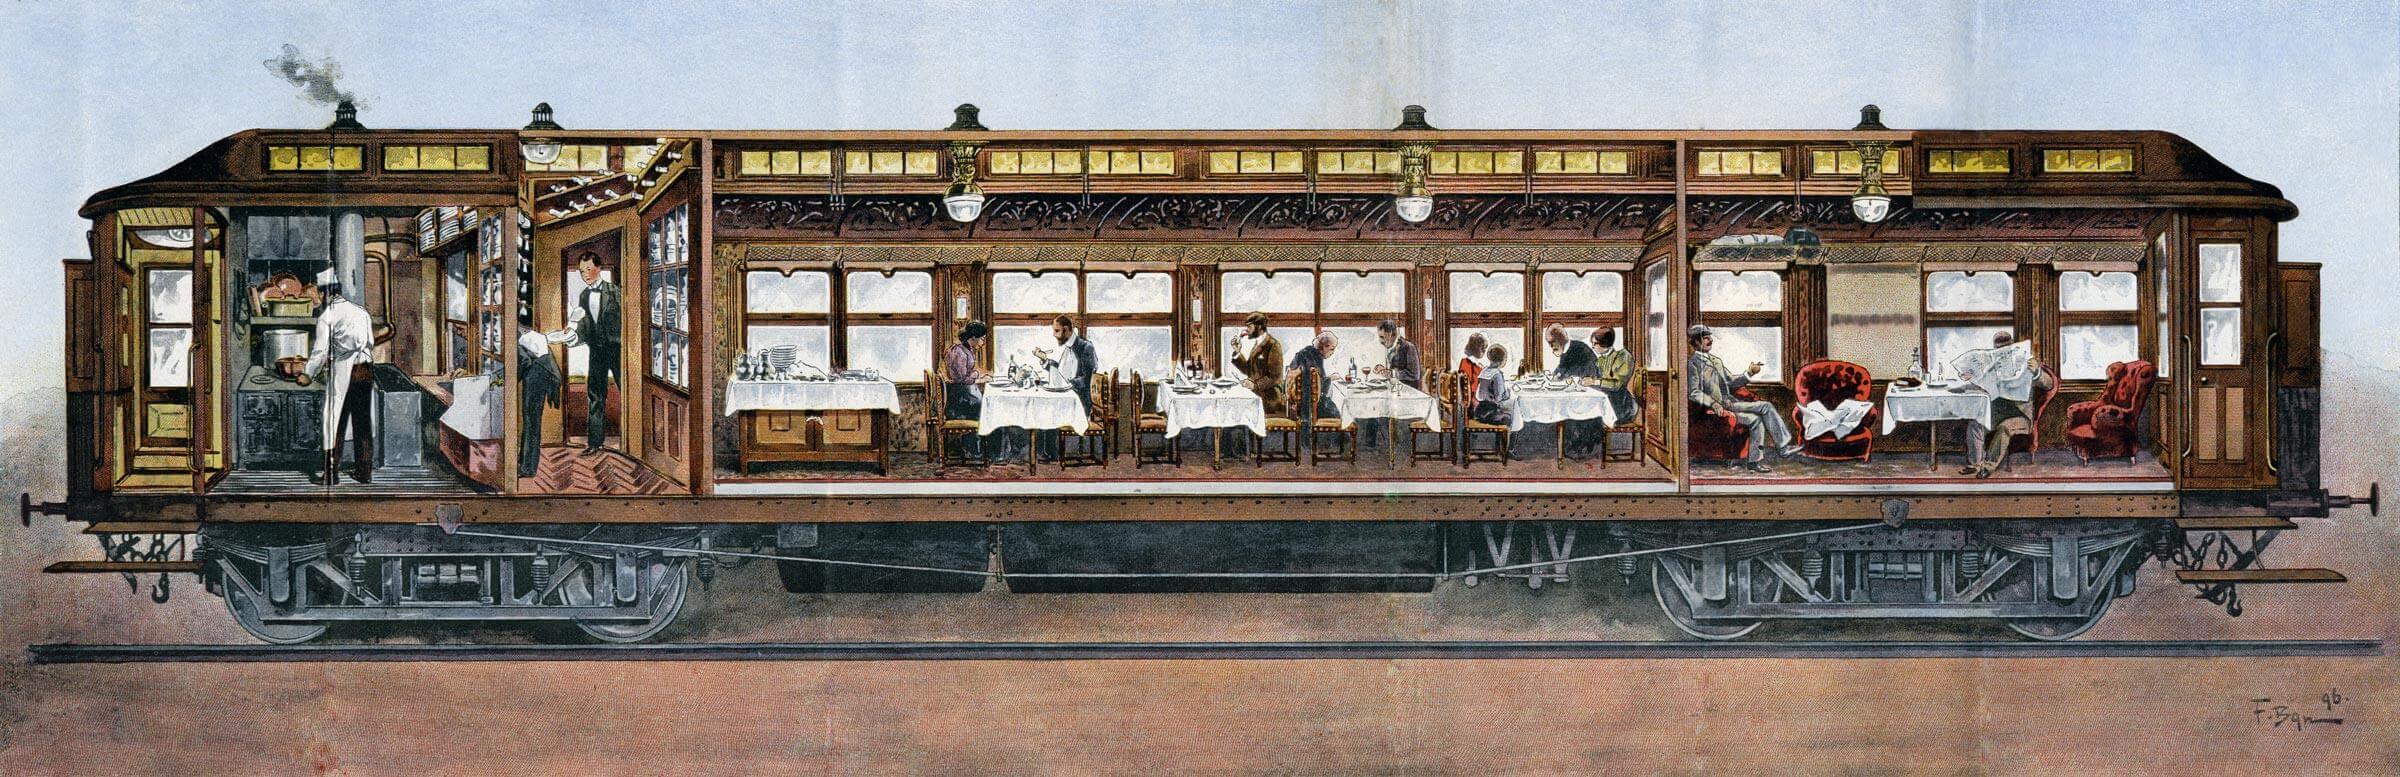 Dining car cross section, 1896.